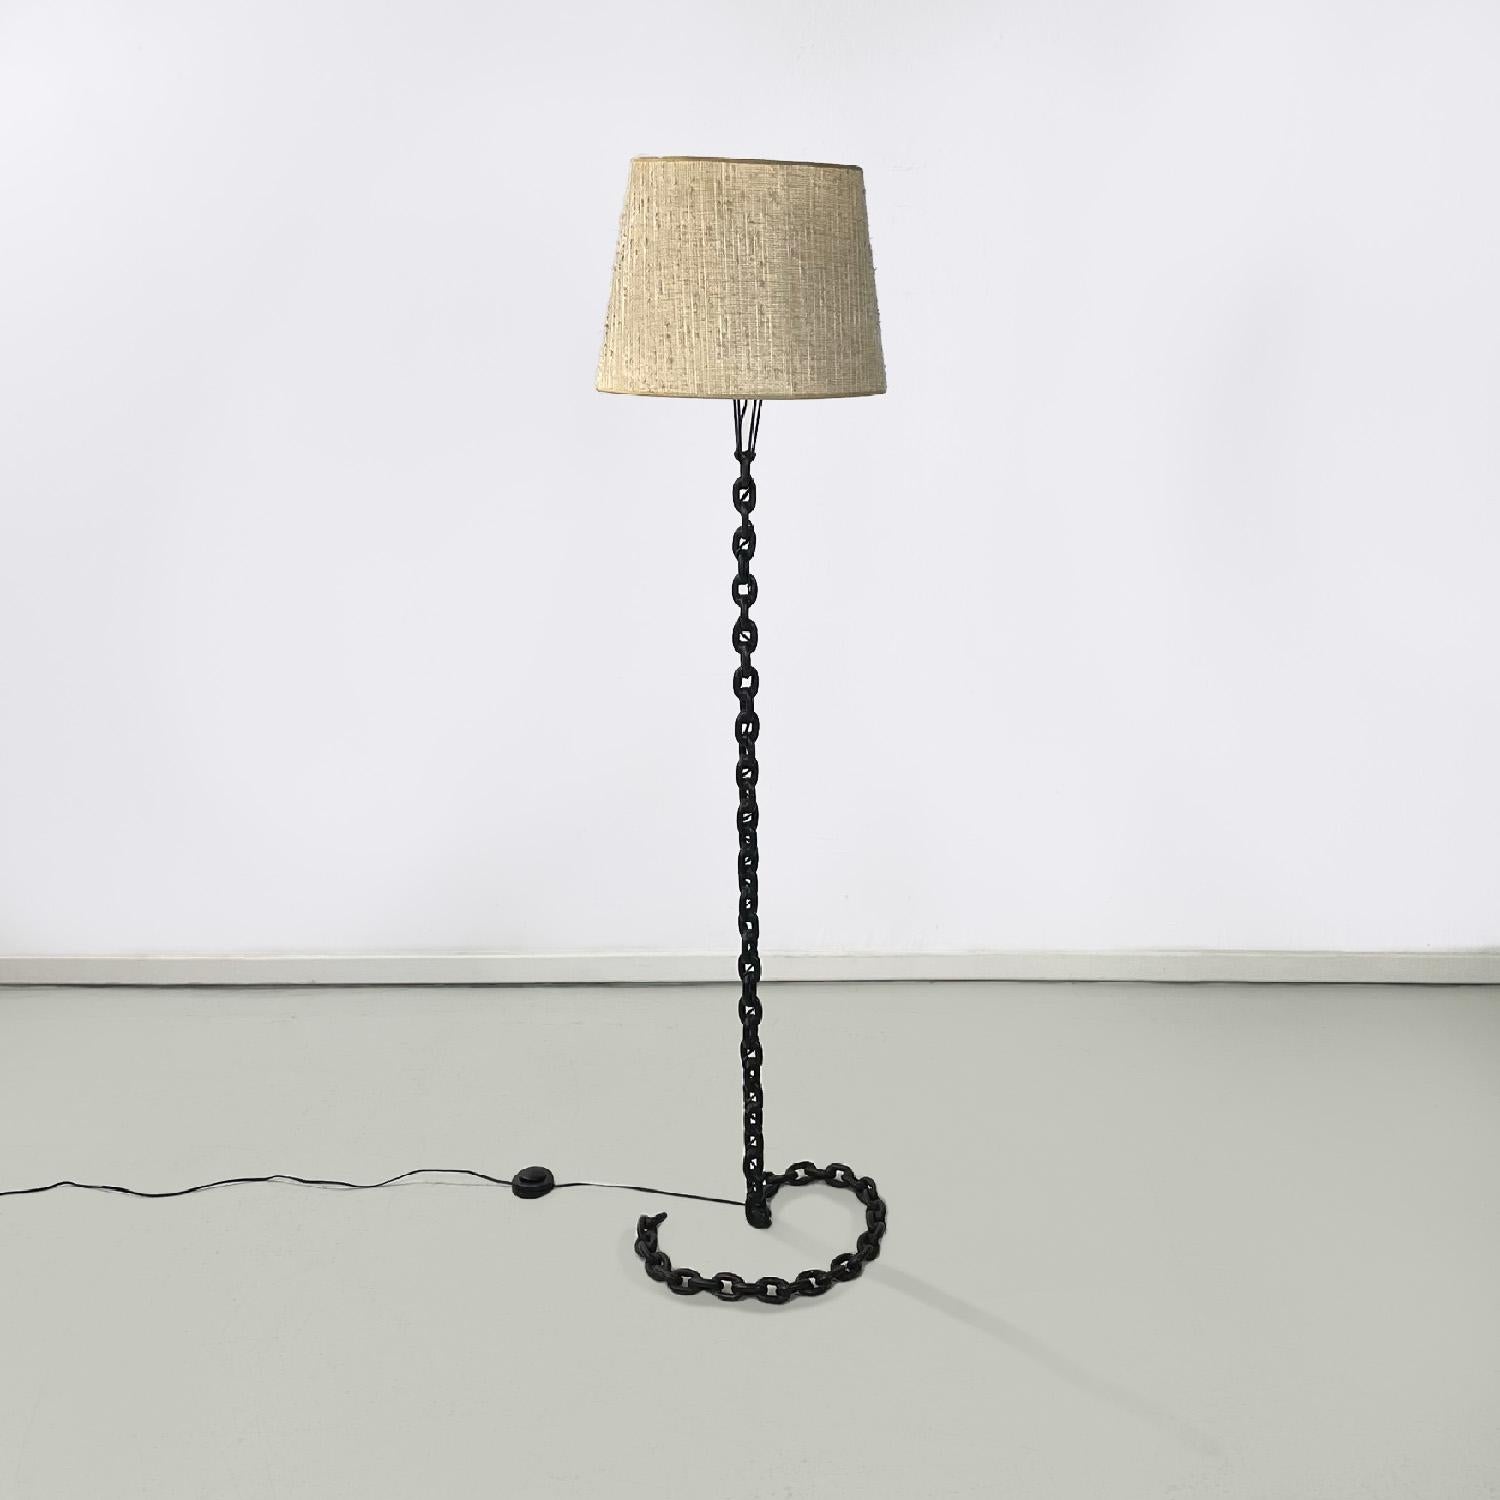 French mid-century modern black metal and beige fabric chain floor lamp, 1950s
Floor lamp with stem and base in black painted metal in the shape of a chain. The stem bends down to create the base. The lampshade is in beige and white fabric. The